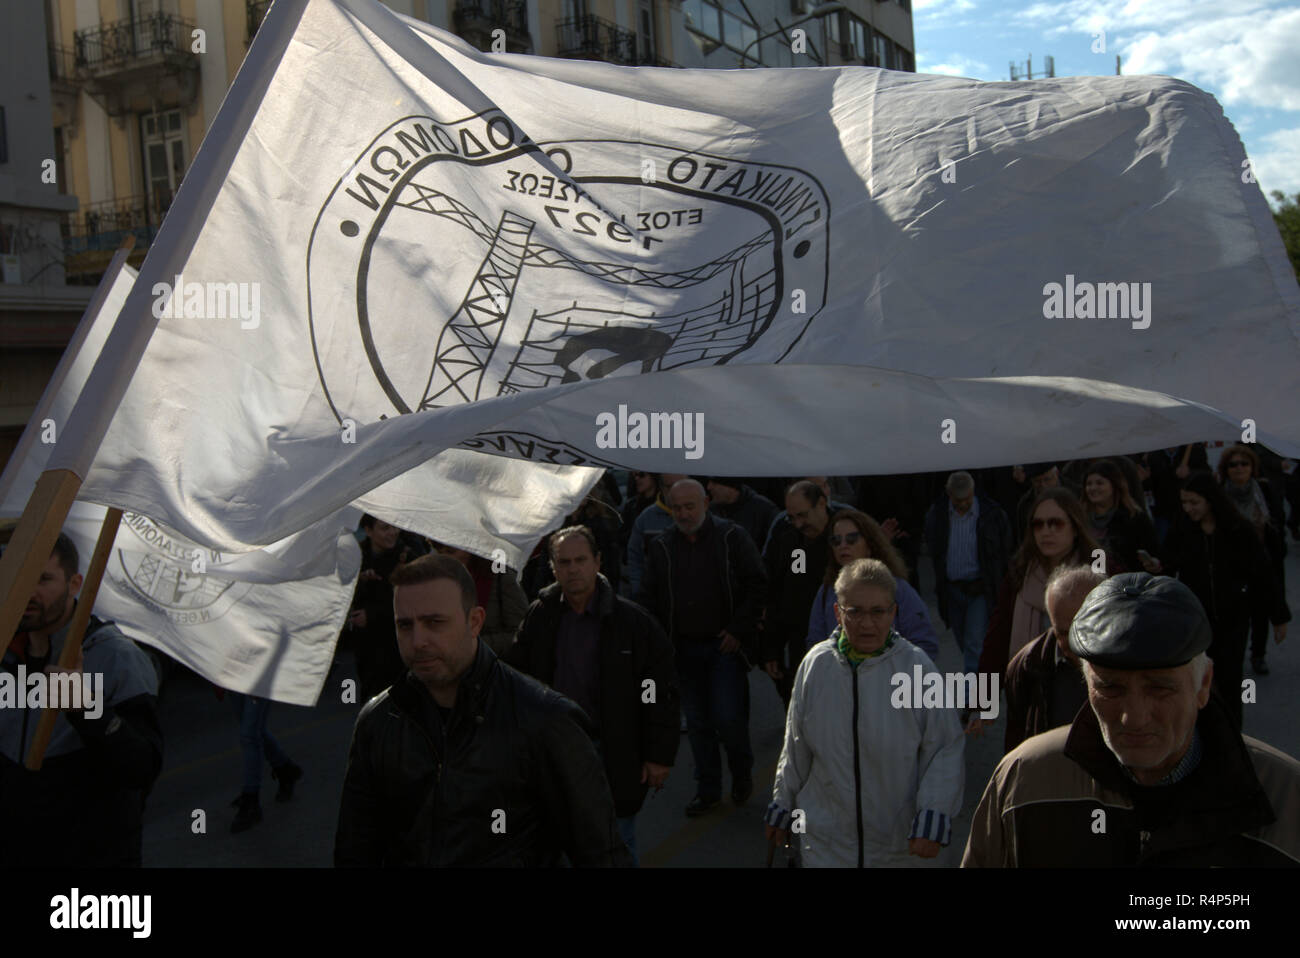 Thessaloniki, Greece, 28th November, 2018. Protesters from the communist-affiliated trade union PAME take part in a demonstration during a 24-hour walkout staged by Greece's largest private sector union GSEE  against planned pension cuts and to demand the reversal of labour reforms implemented under the country's third bailout. The strike by the GSEE union is the second major strike since Greece exited its bailout programm in August. Credit : Orhan Tsolak / Alamy Live News. Stock Photo